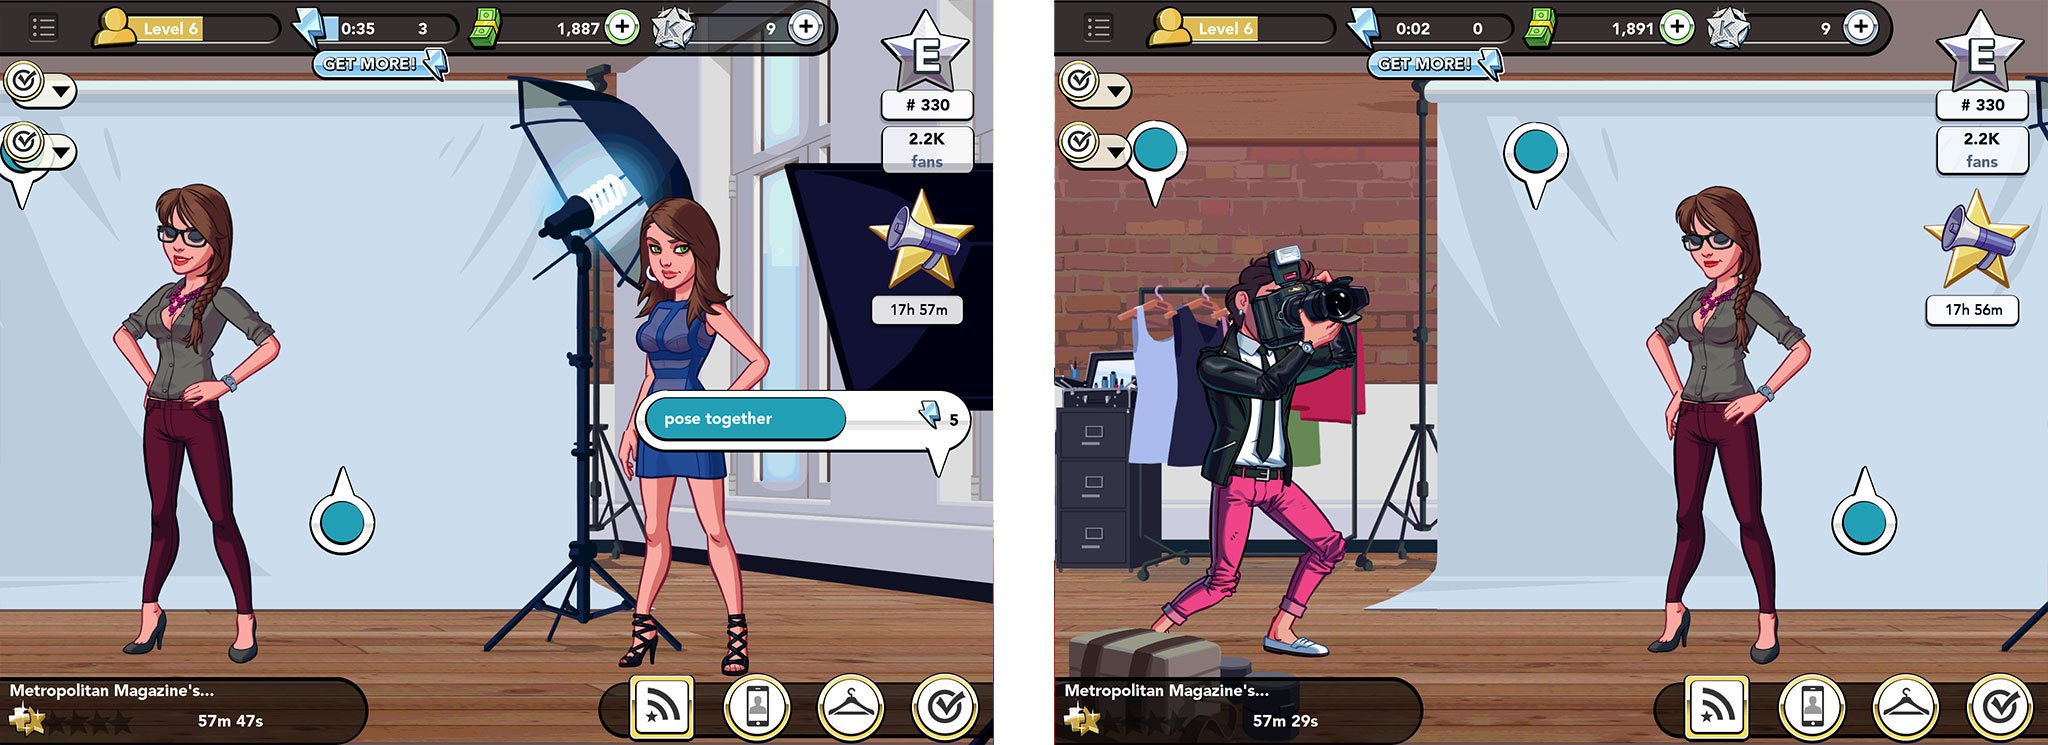 Kim Kardashian: Hollywood: Top 8 tips, hints, and cheats you need to know!